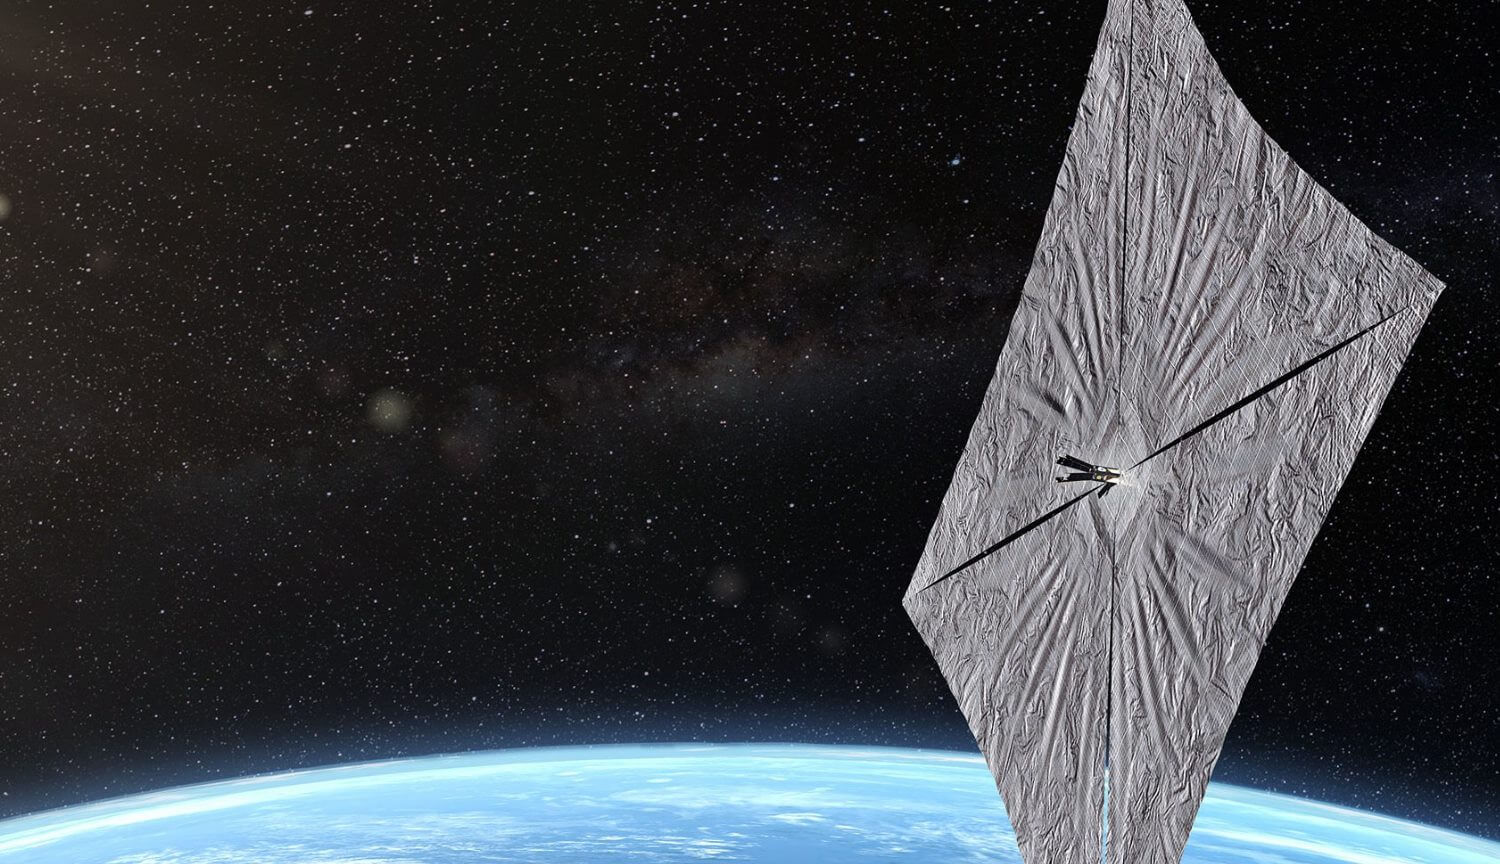 Solar sail LightSail 2 successfully contacted the Ground. What's next?